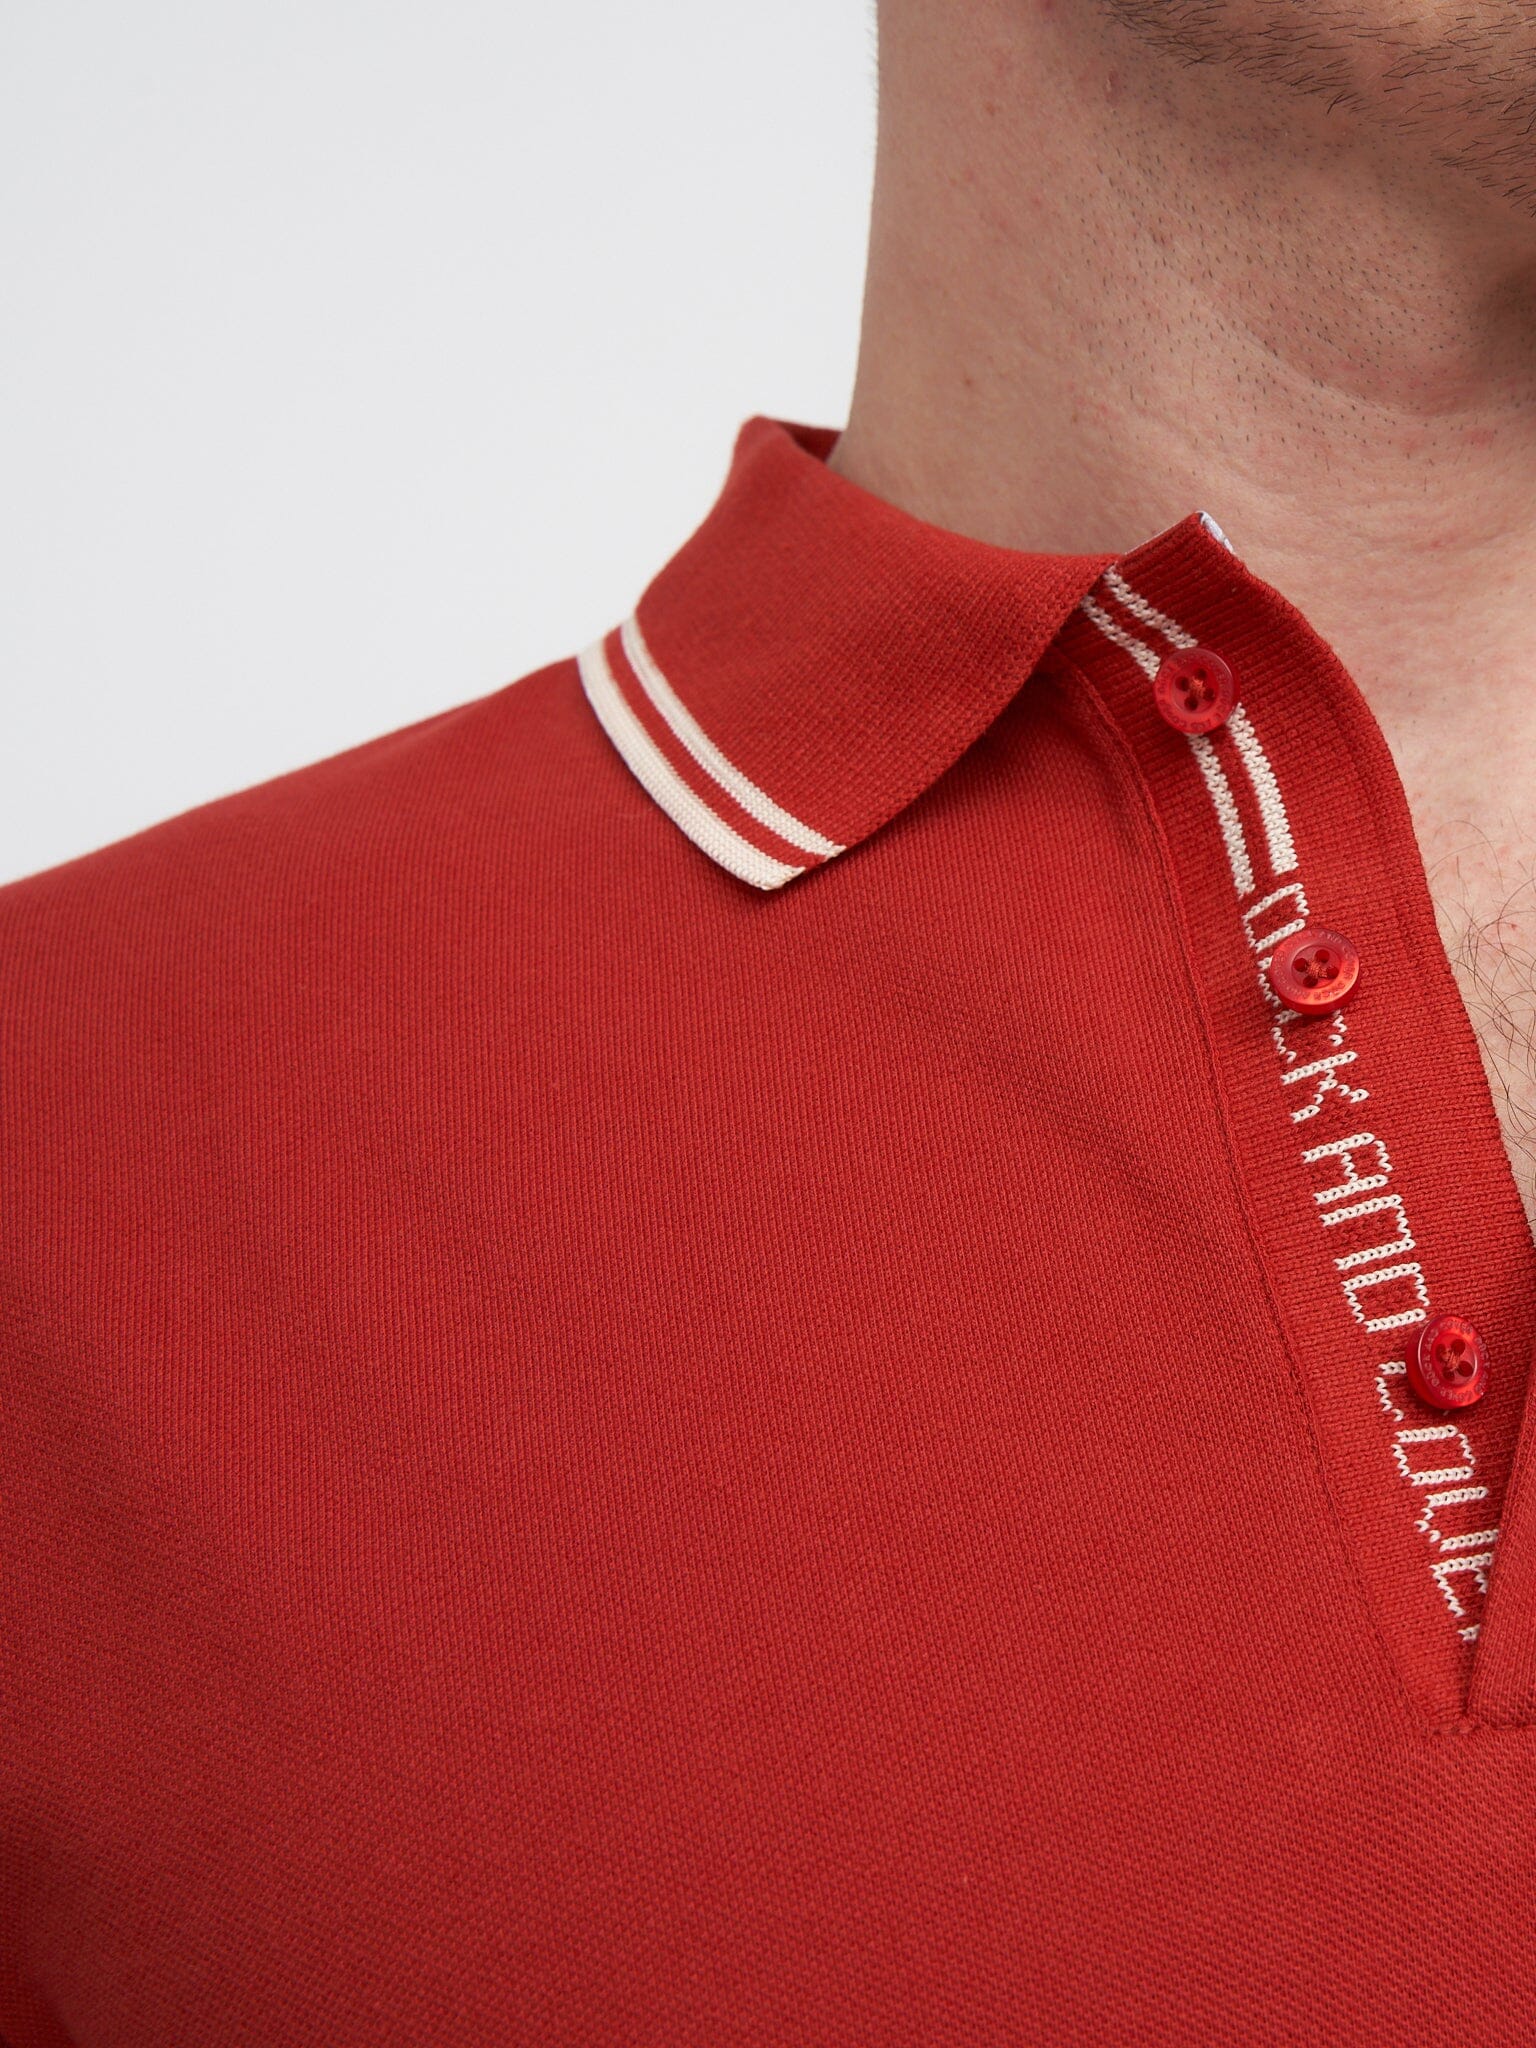 Samtrase Polo Red